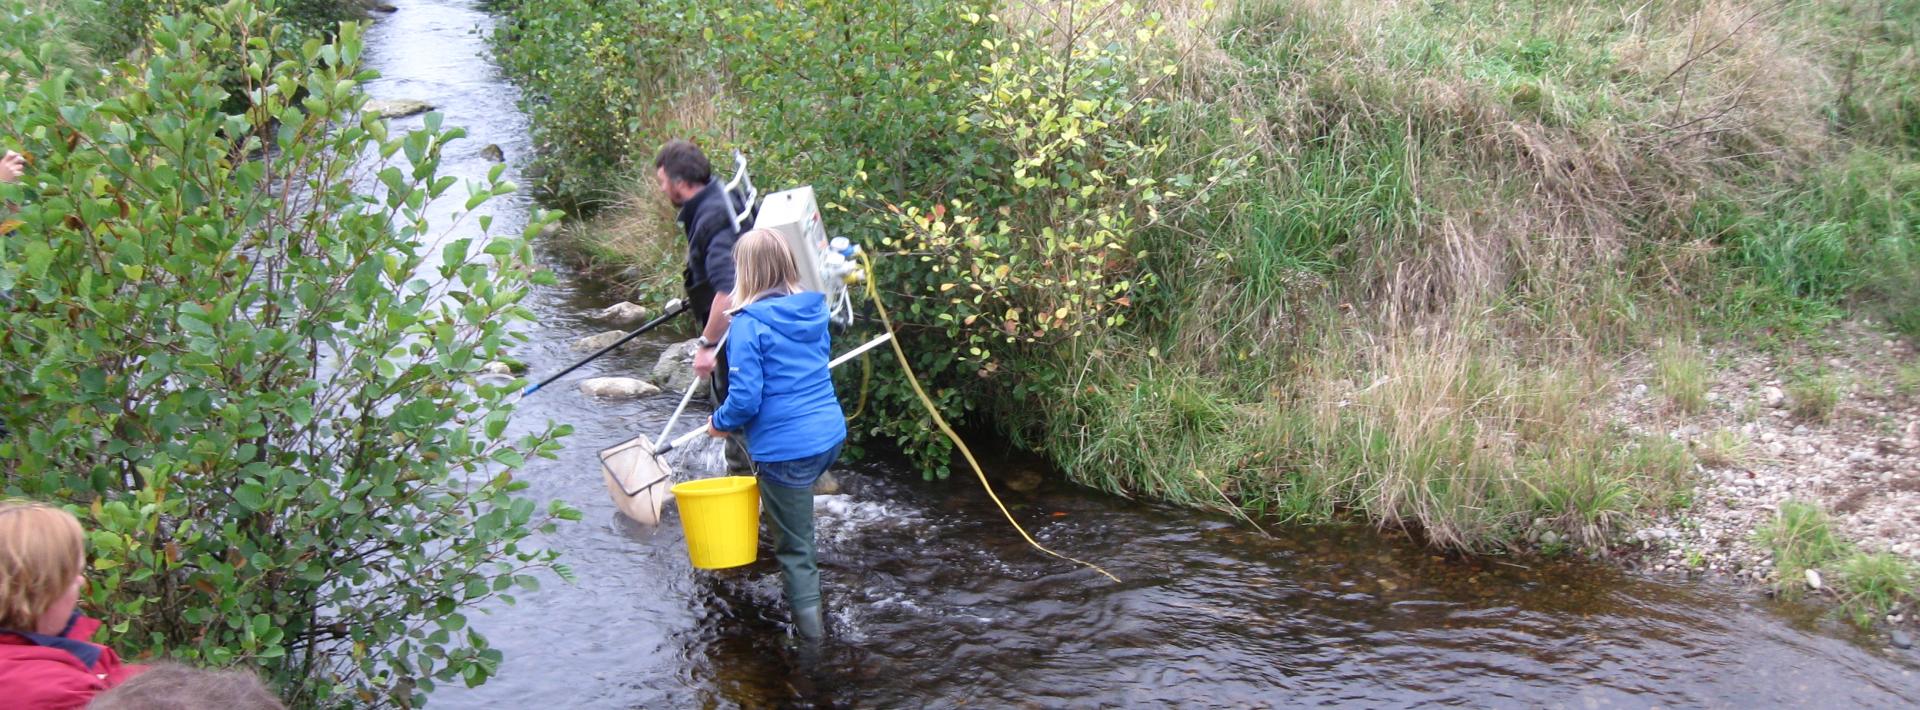 People in river conducting fish survey